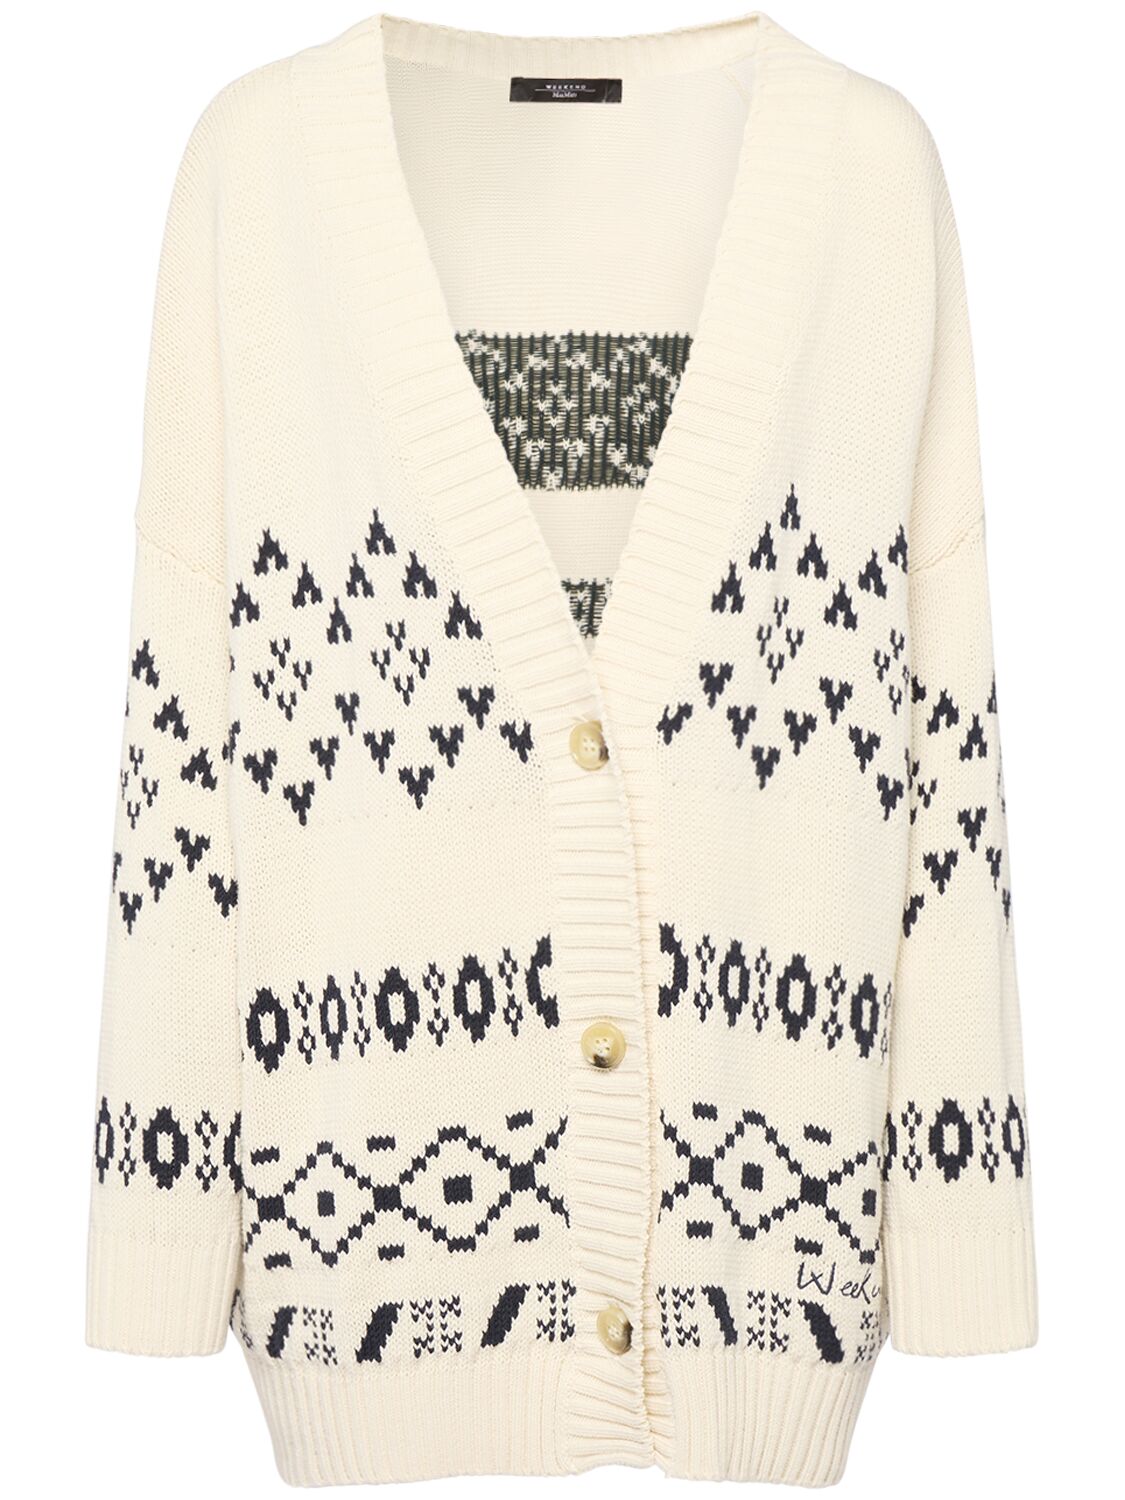 Acacia Embroidered Cotton Blend Cardigan